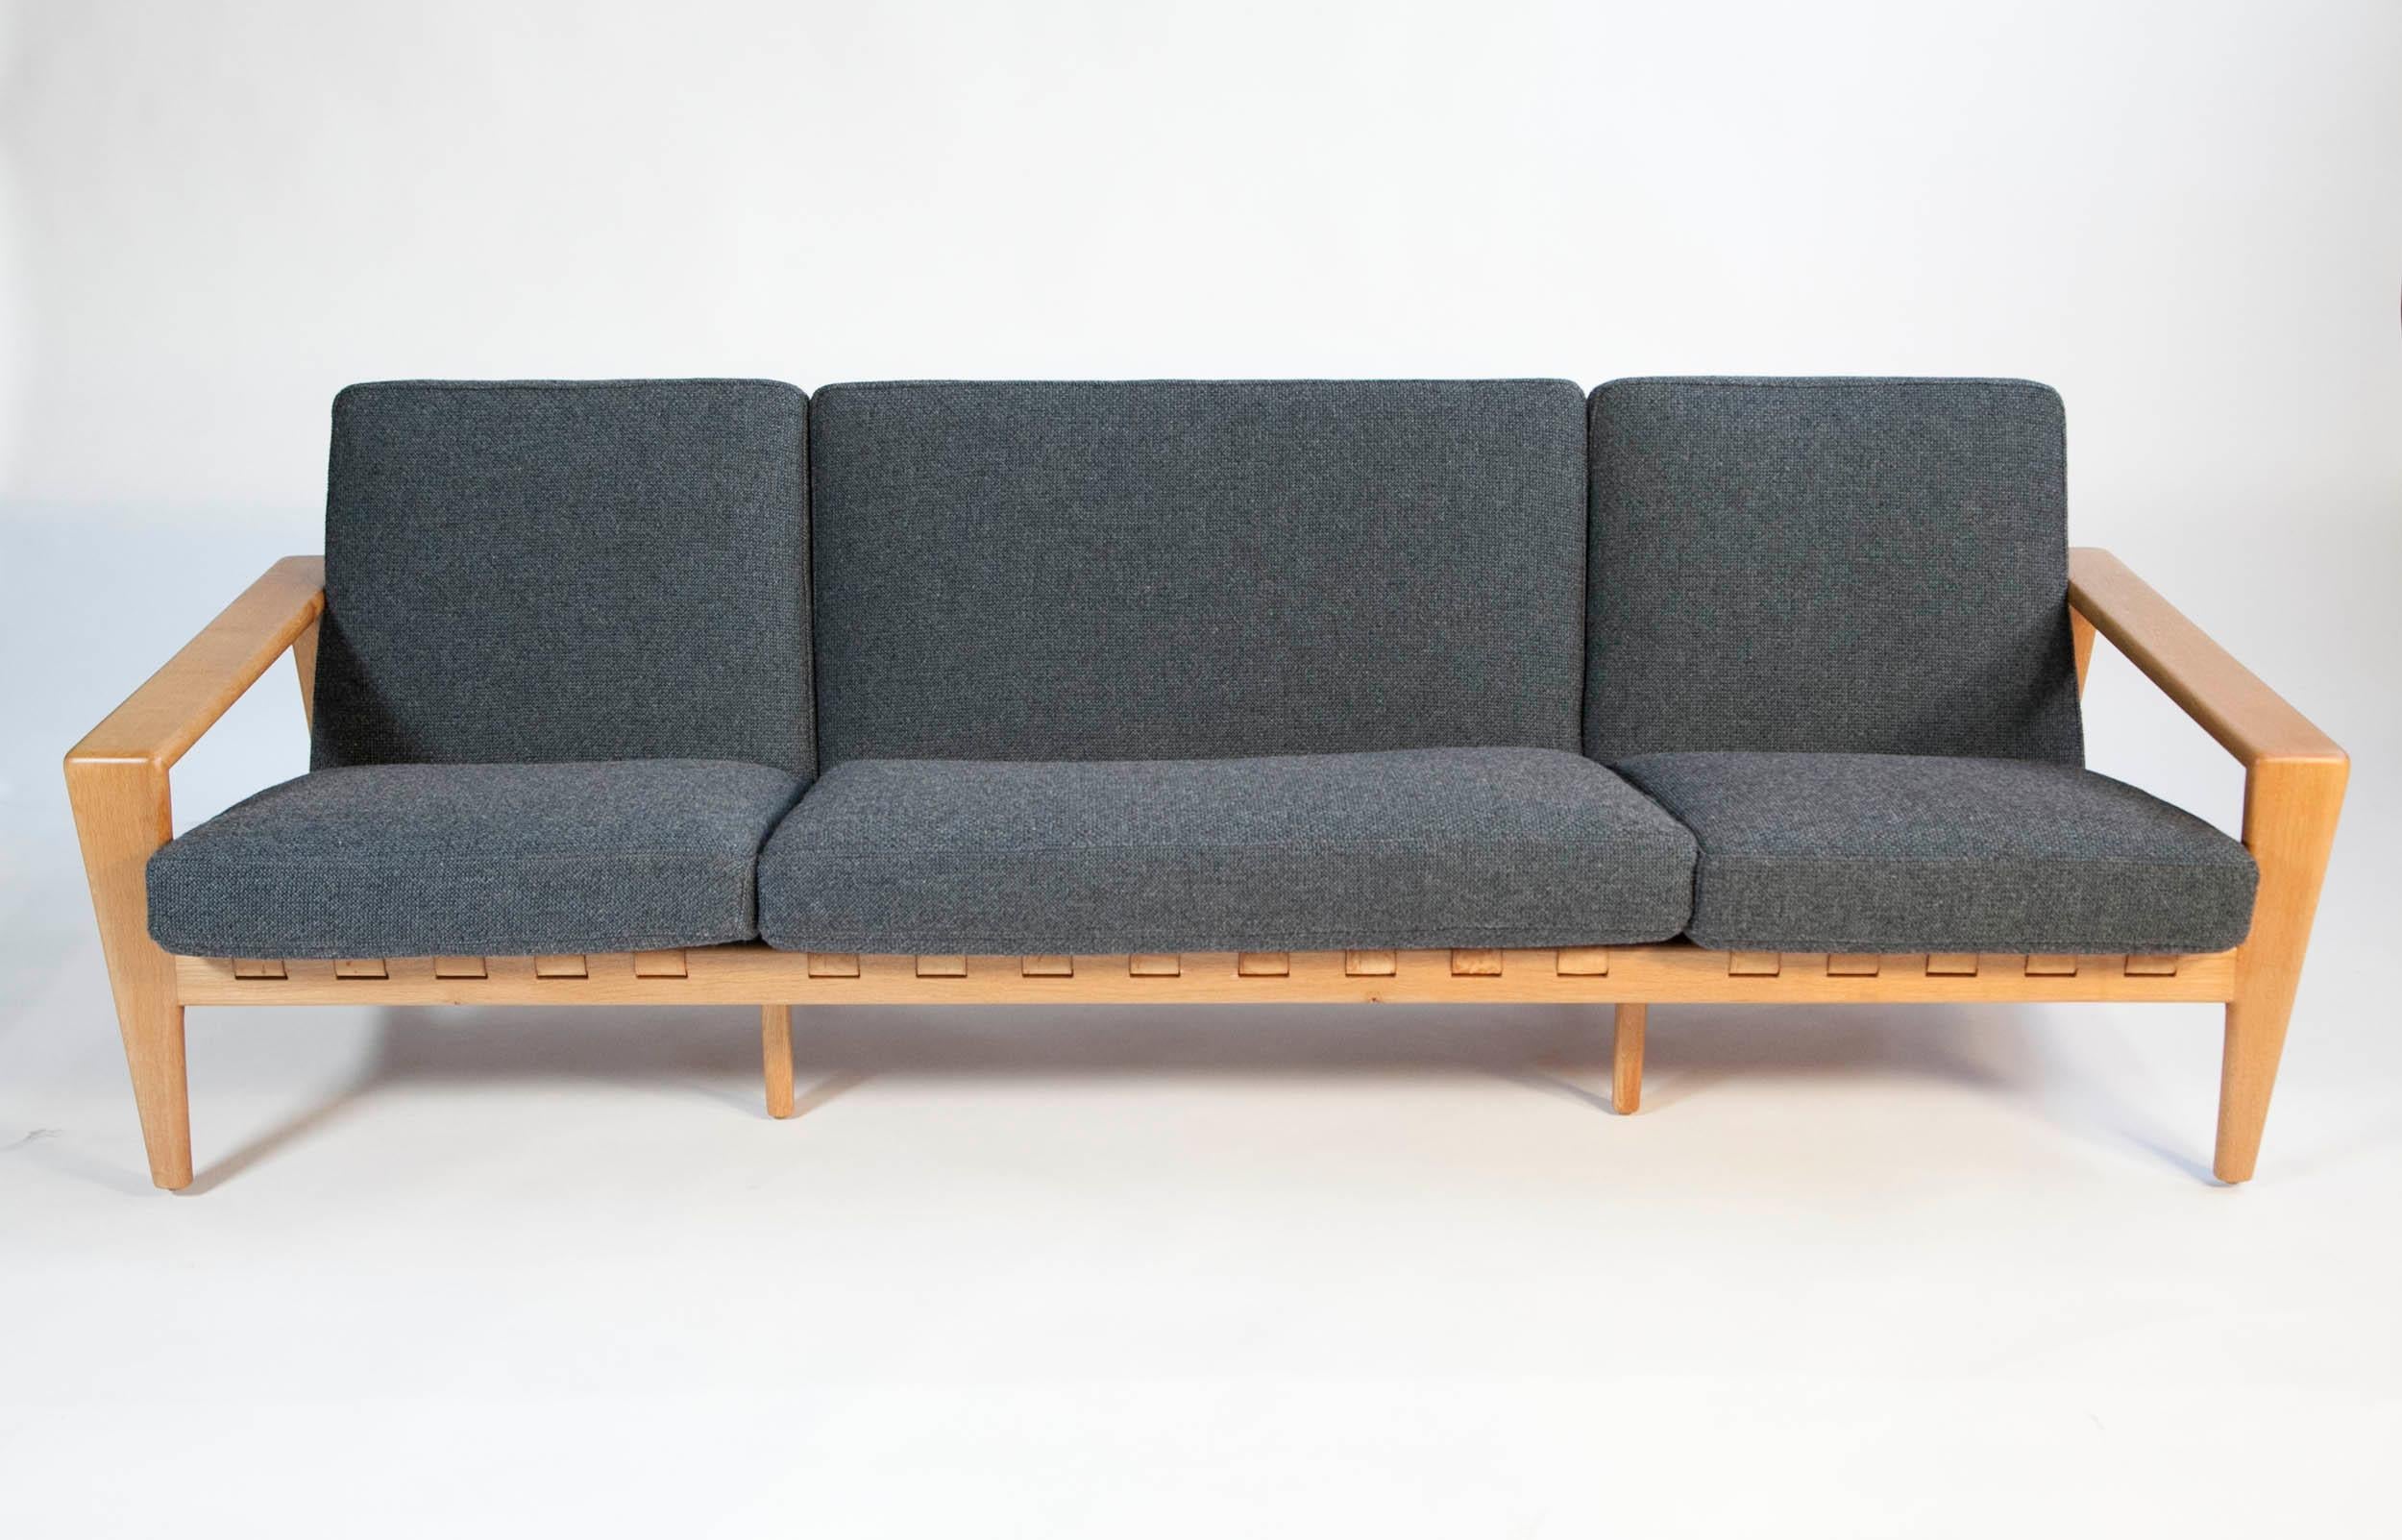 Svante Skogh four-seat Bodö sofa by Seffle Möbelfabrik in Sweden, 1960s

This rare four-seat Bodö sofa was designed by Svante Skogh and produced in Sweden by Seffle Möbelfabrik in the 1960s. With a solid oak frame that is bookended with cascading